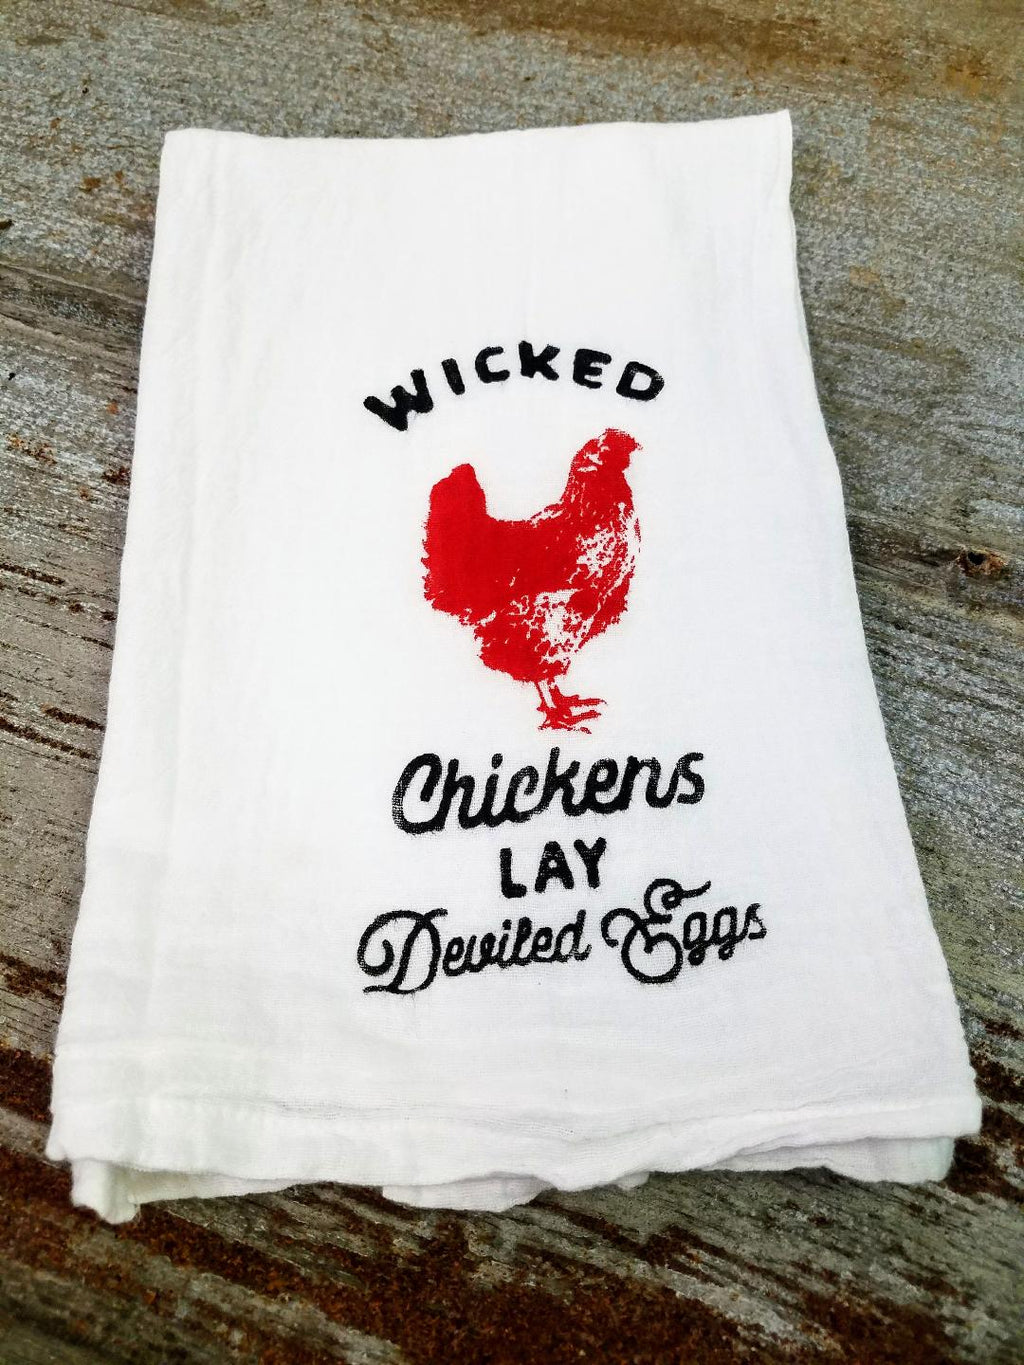 100% Cotton Flour Sack Towel - Wicked Chickens